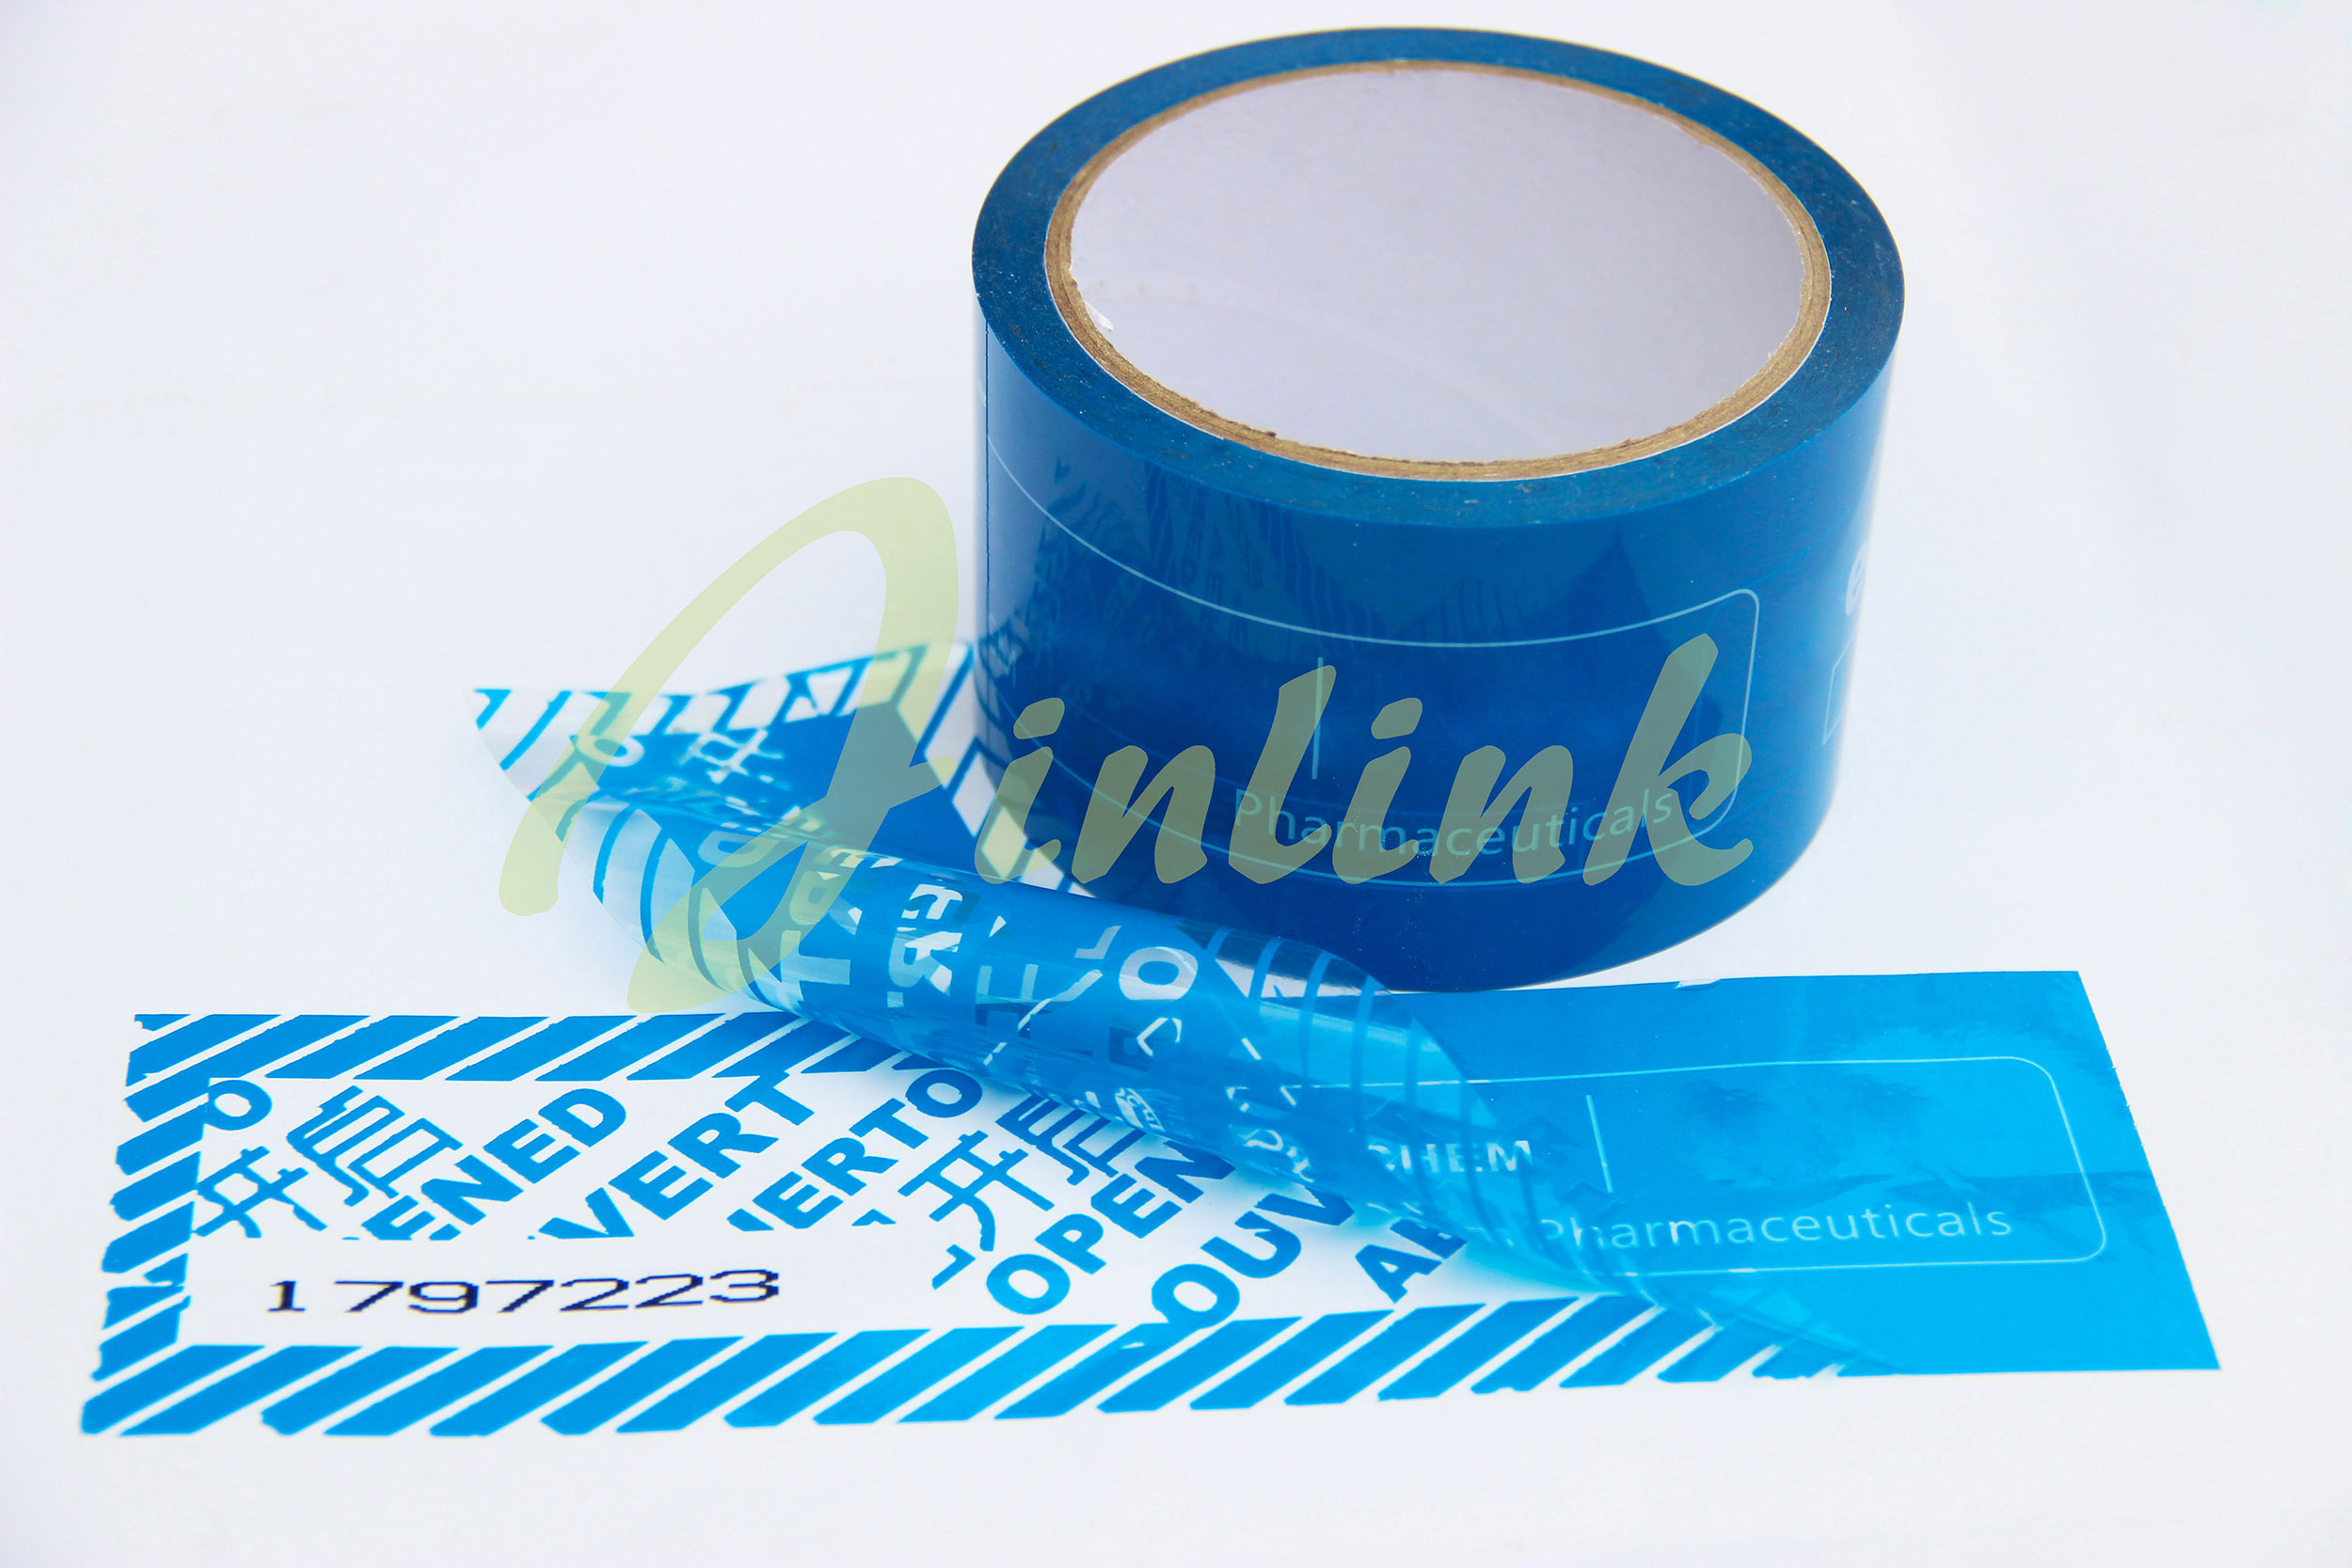 Tamper evident security tape function